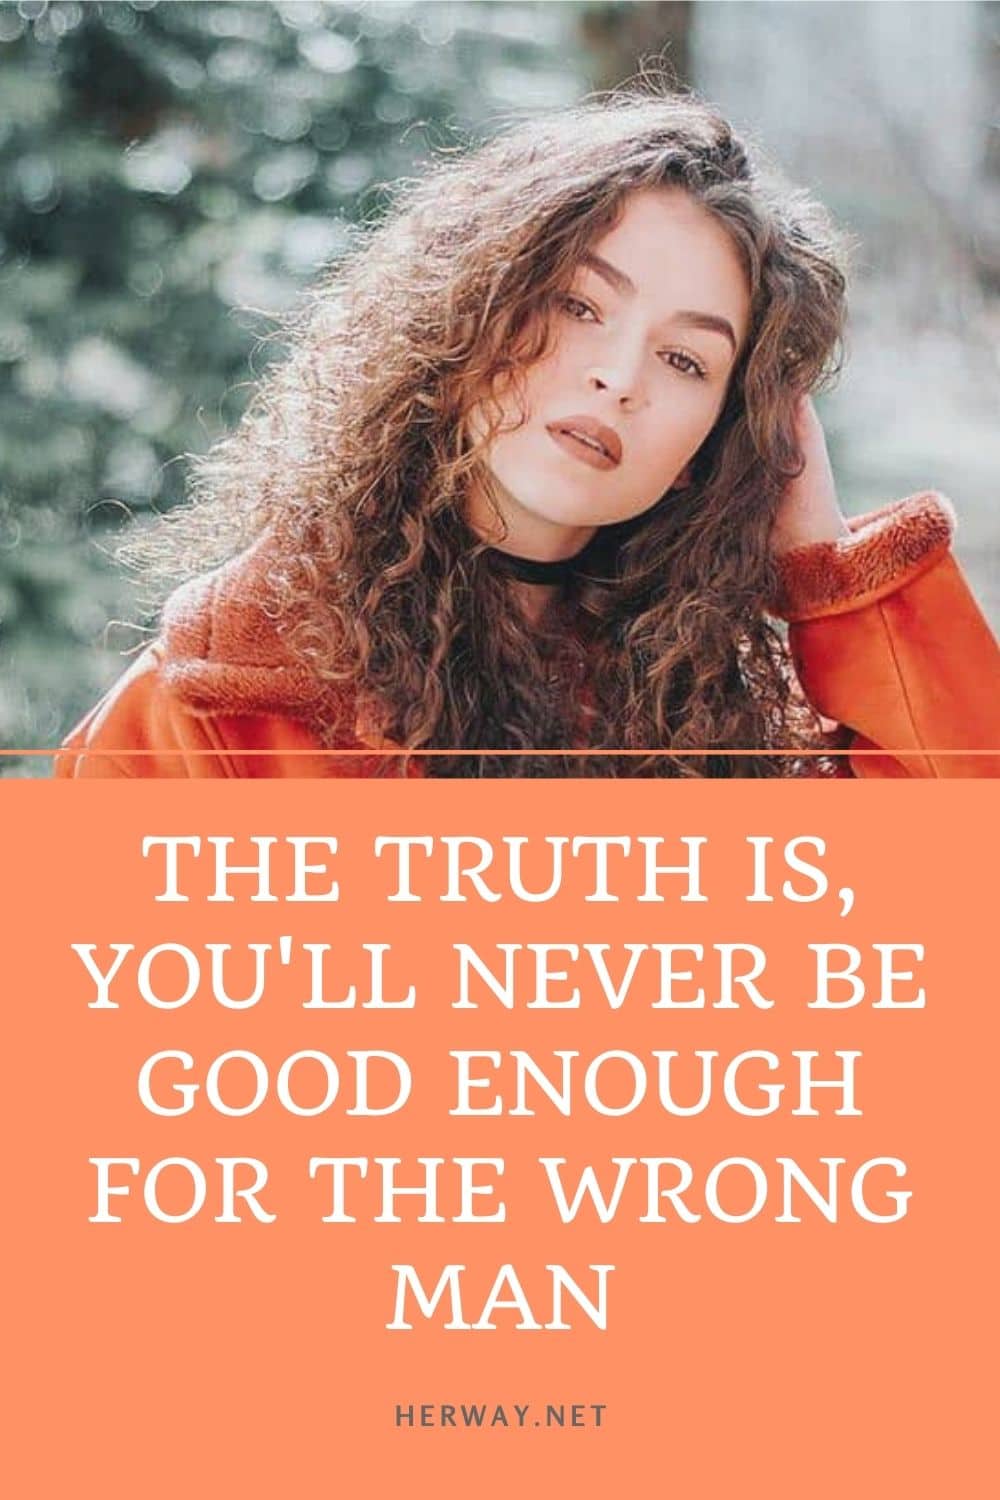 The Truth Is, You'll Never Be Good Enough For The Wrong Man